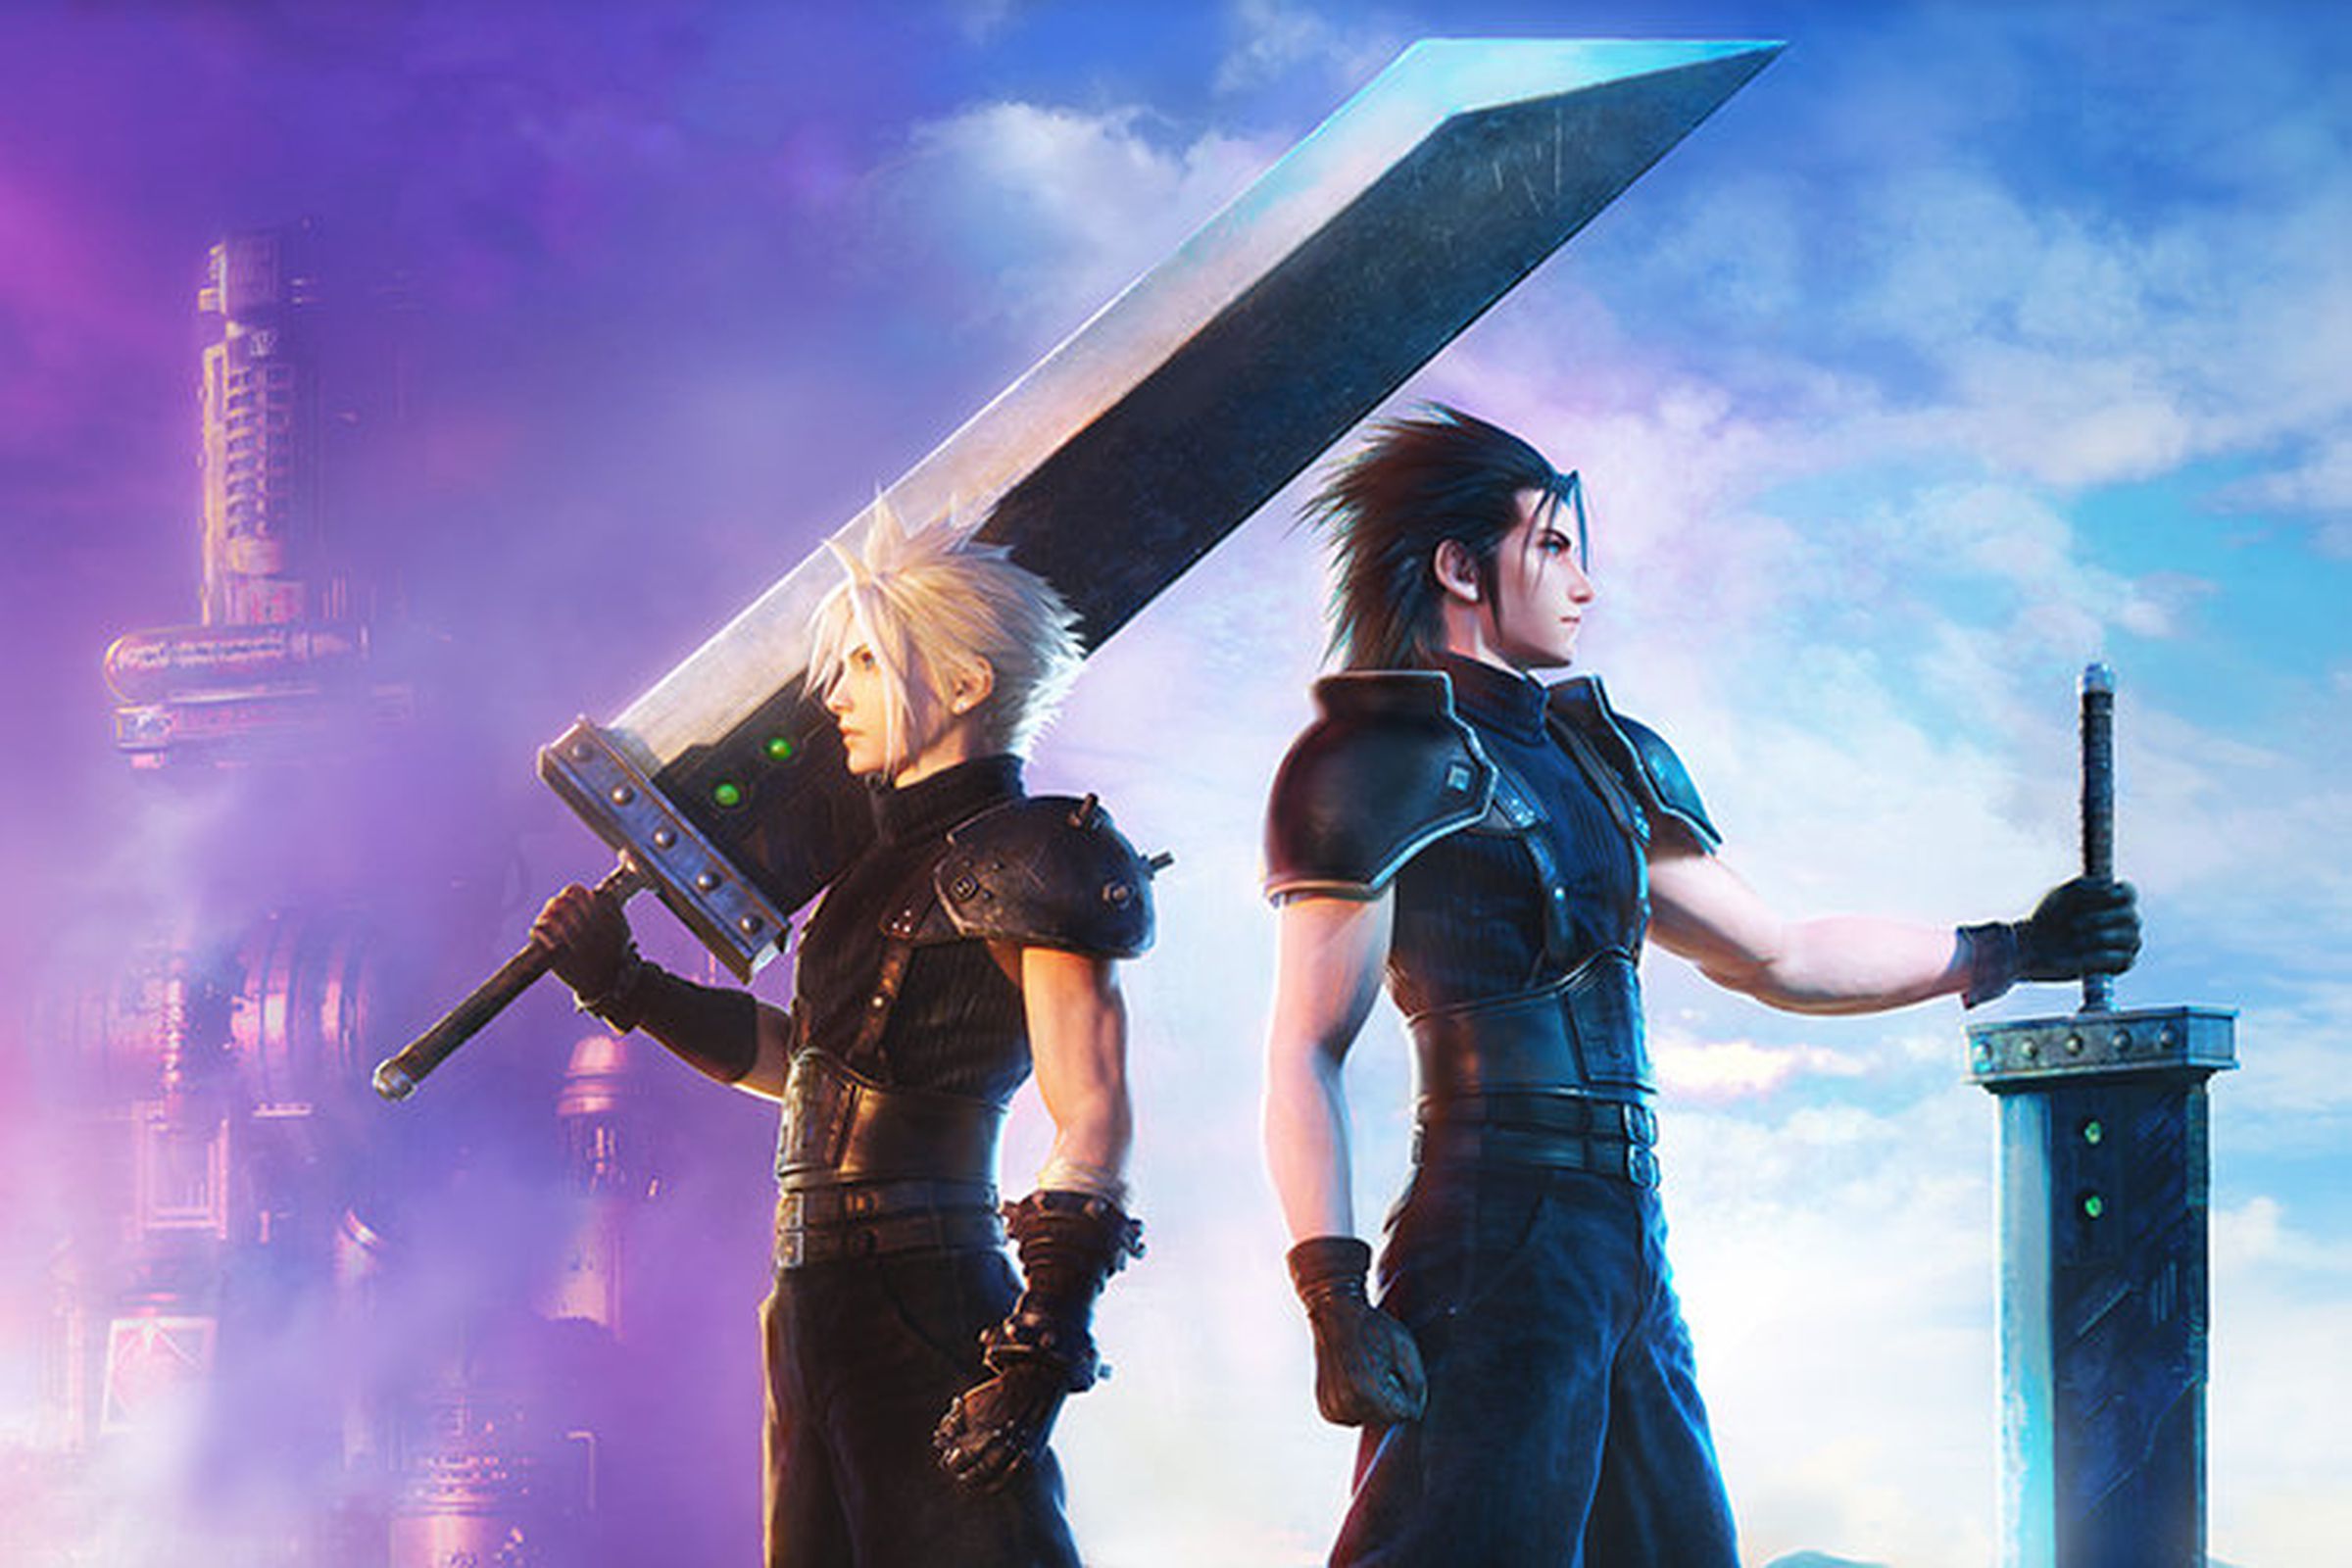 Promotional art for Final Fantasy VII Ever Crisis featuring Cloud Strife and Zack Fair.